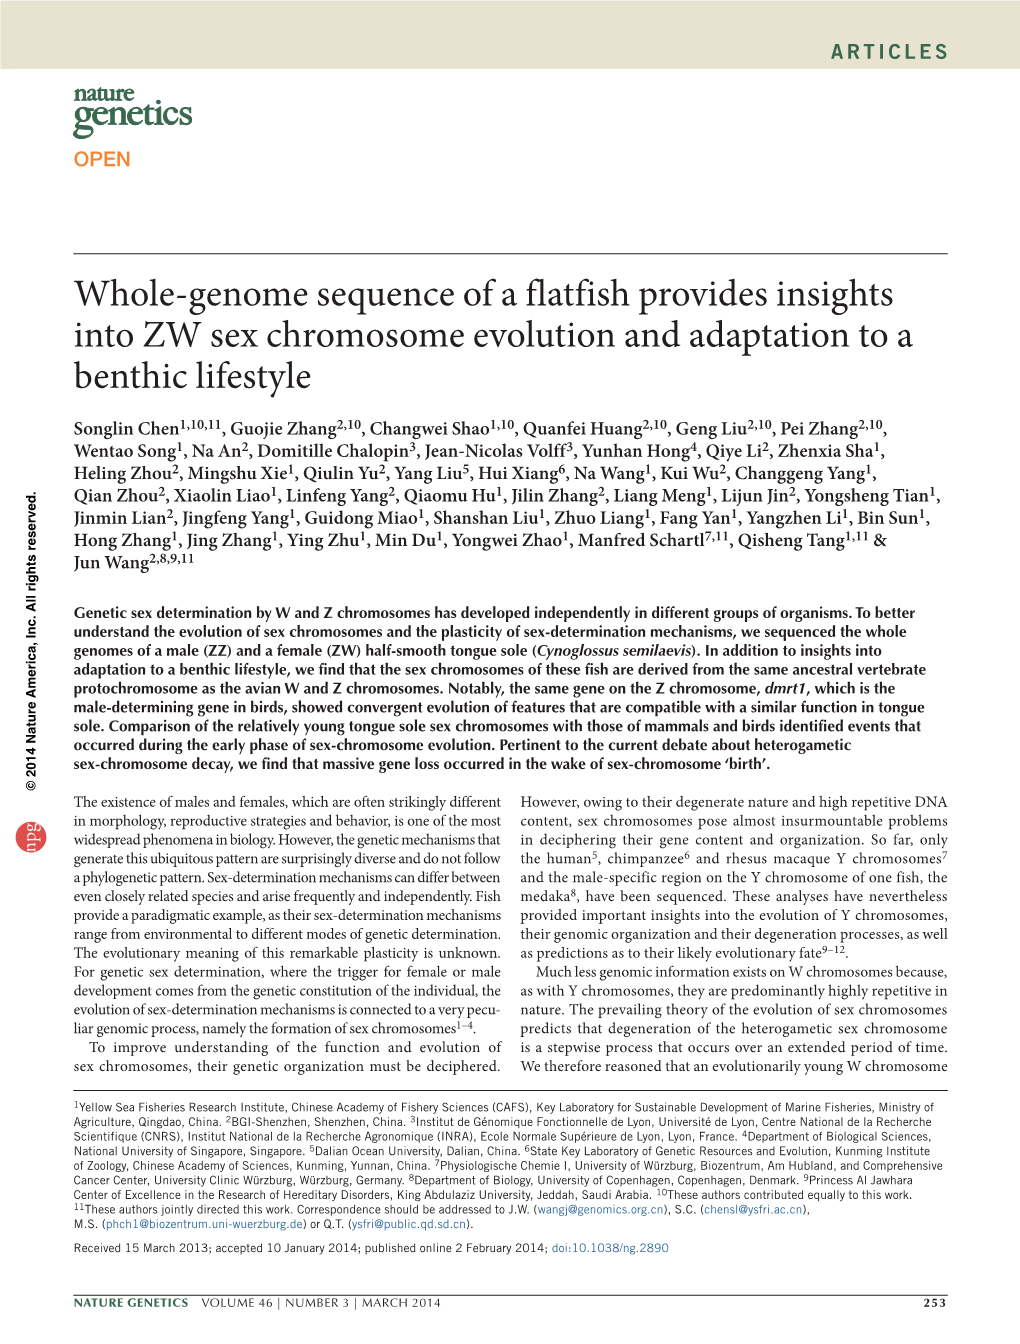 Whole-Genome Sequence of a Flatfish Provides Insights Into ZW Sex Chromosome Evolution and Adaptation to a Benthic Lifestyle